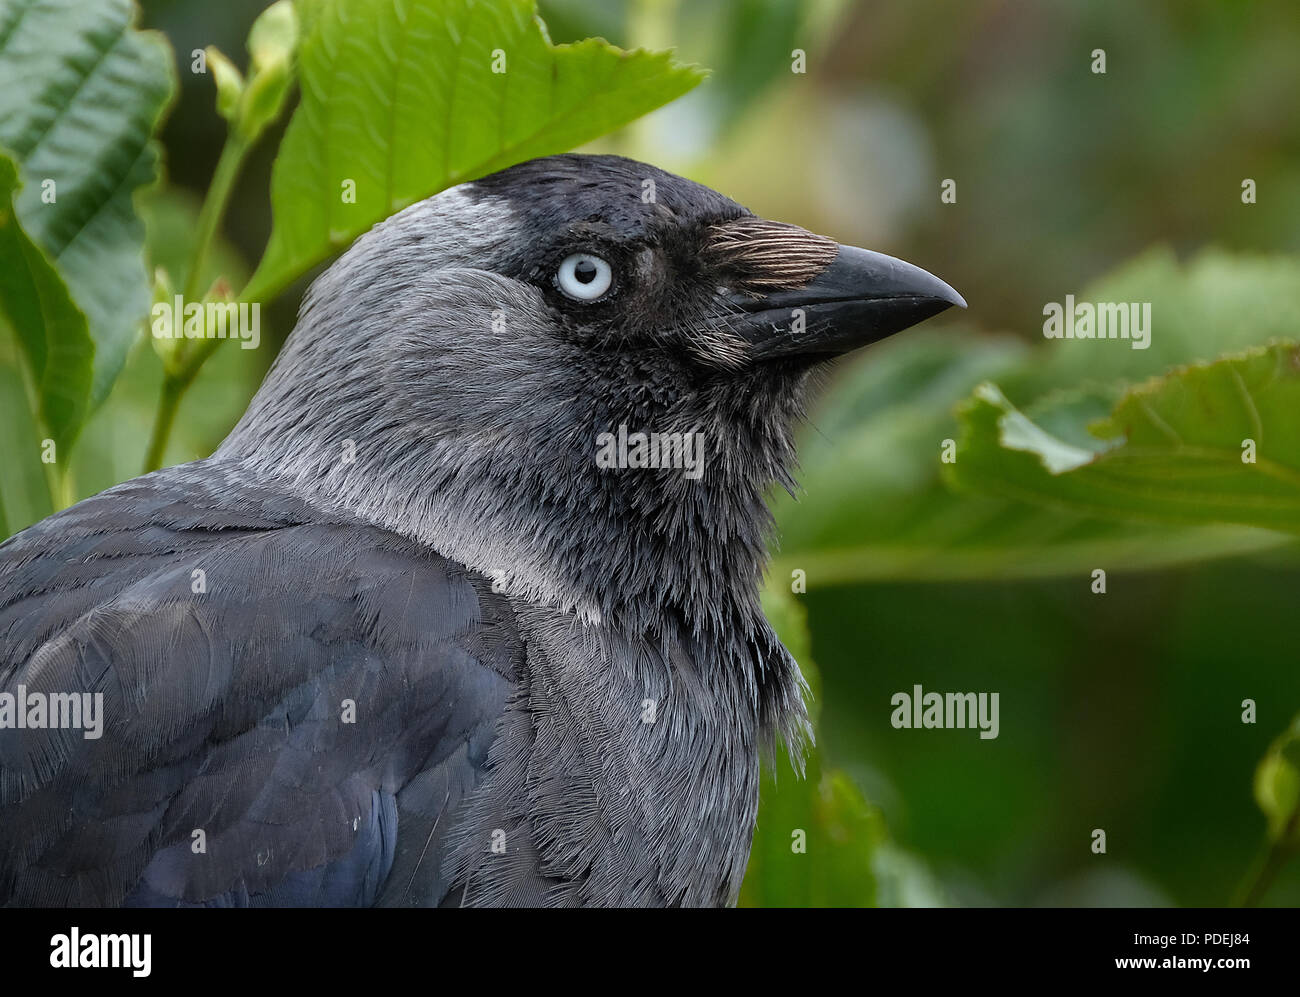 Jackdaw. This is a small, black crow with a distinctive silvery sheen to the back of its head. The pale eyes are also noticeable. Stock Photo